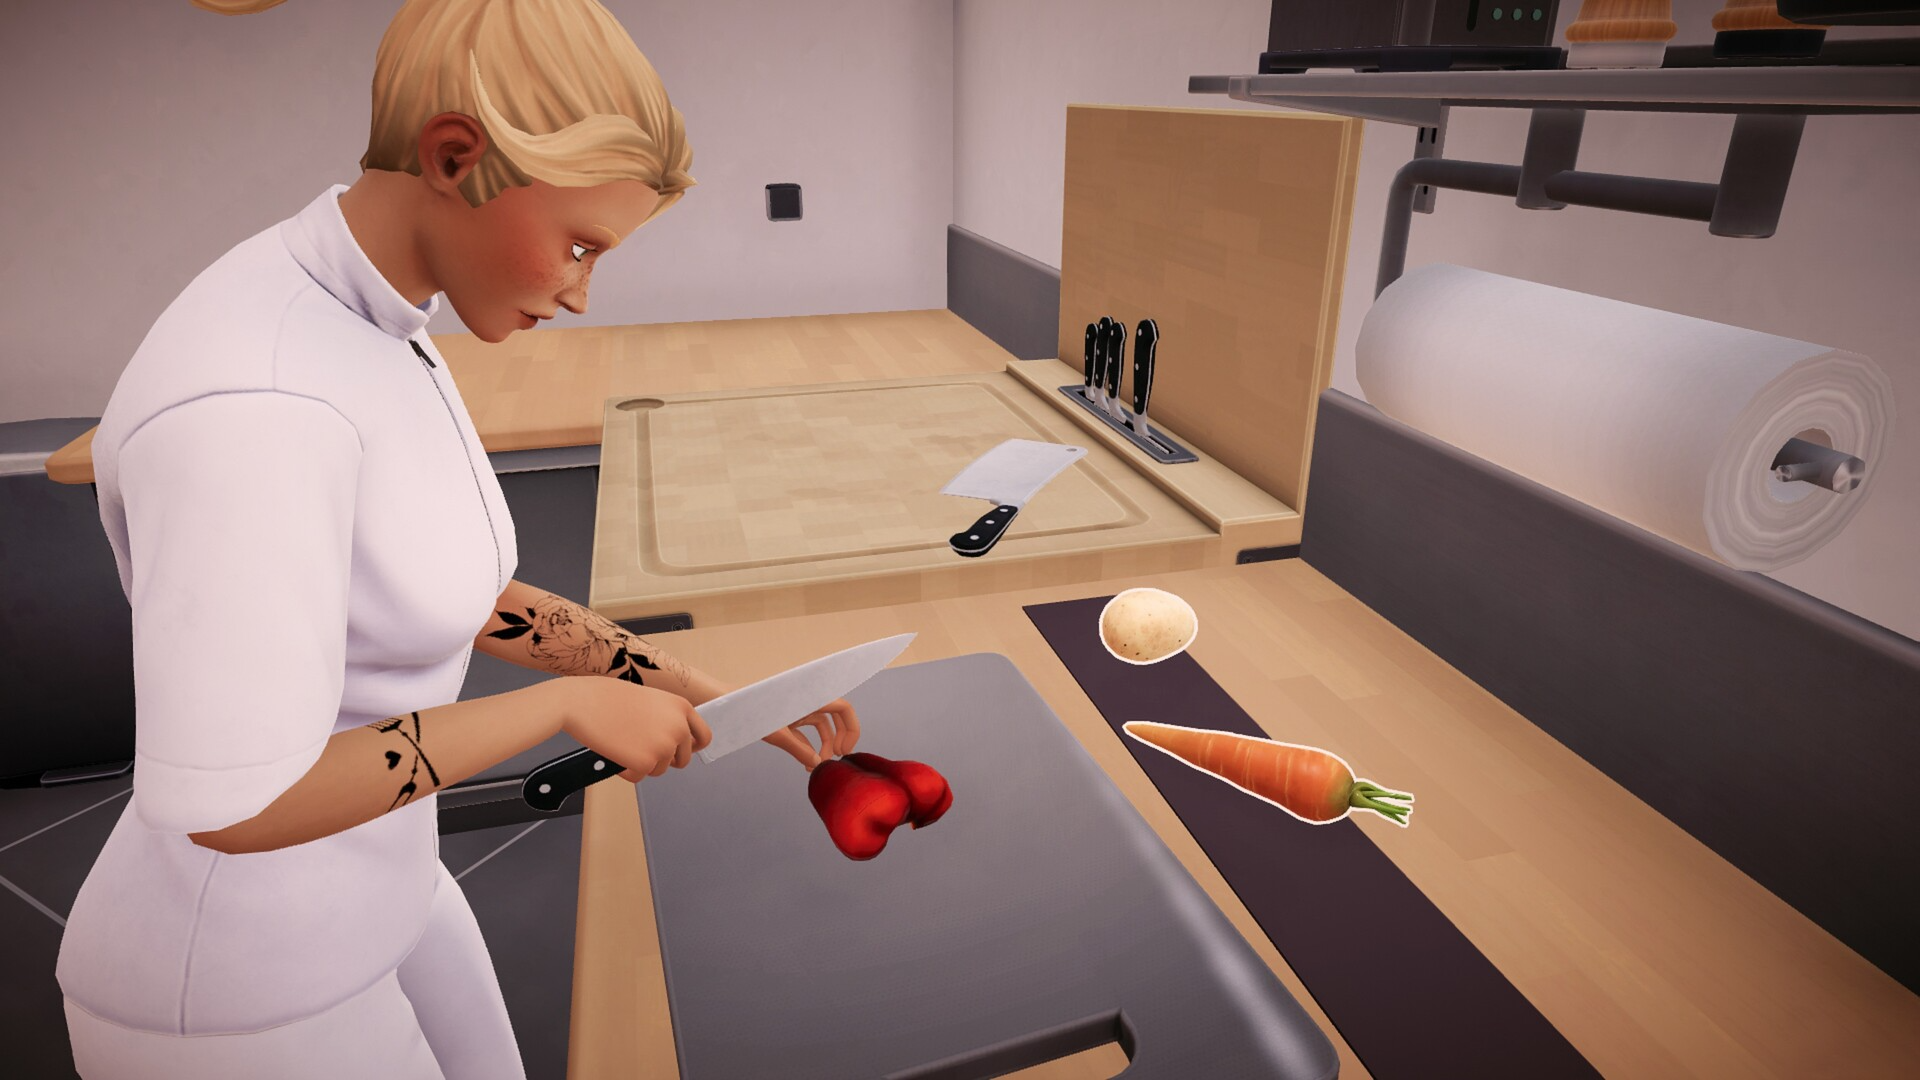 Chef Life: A Restaurant Simulator Early Adopter Bundle